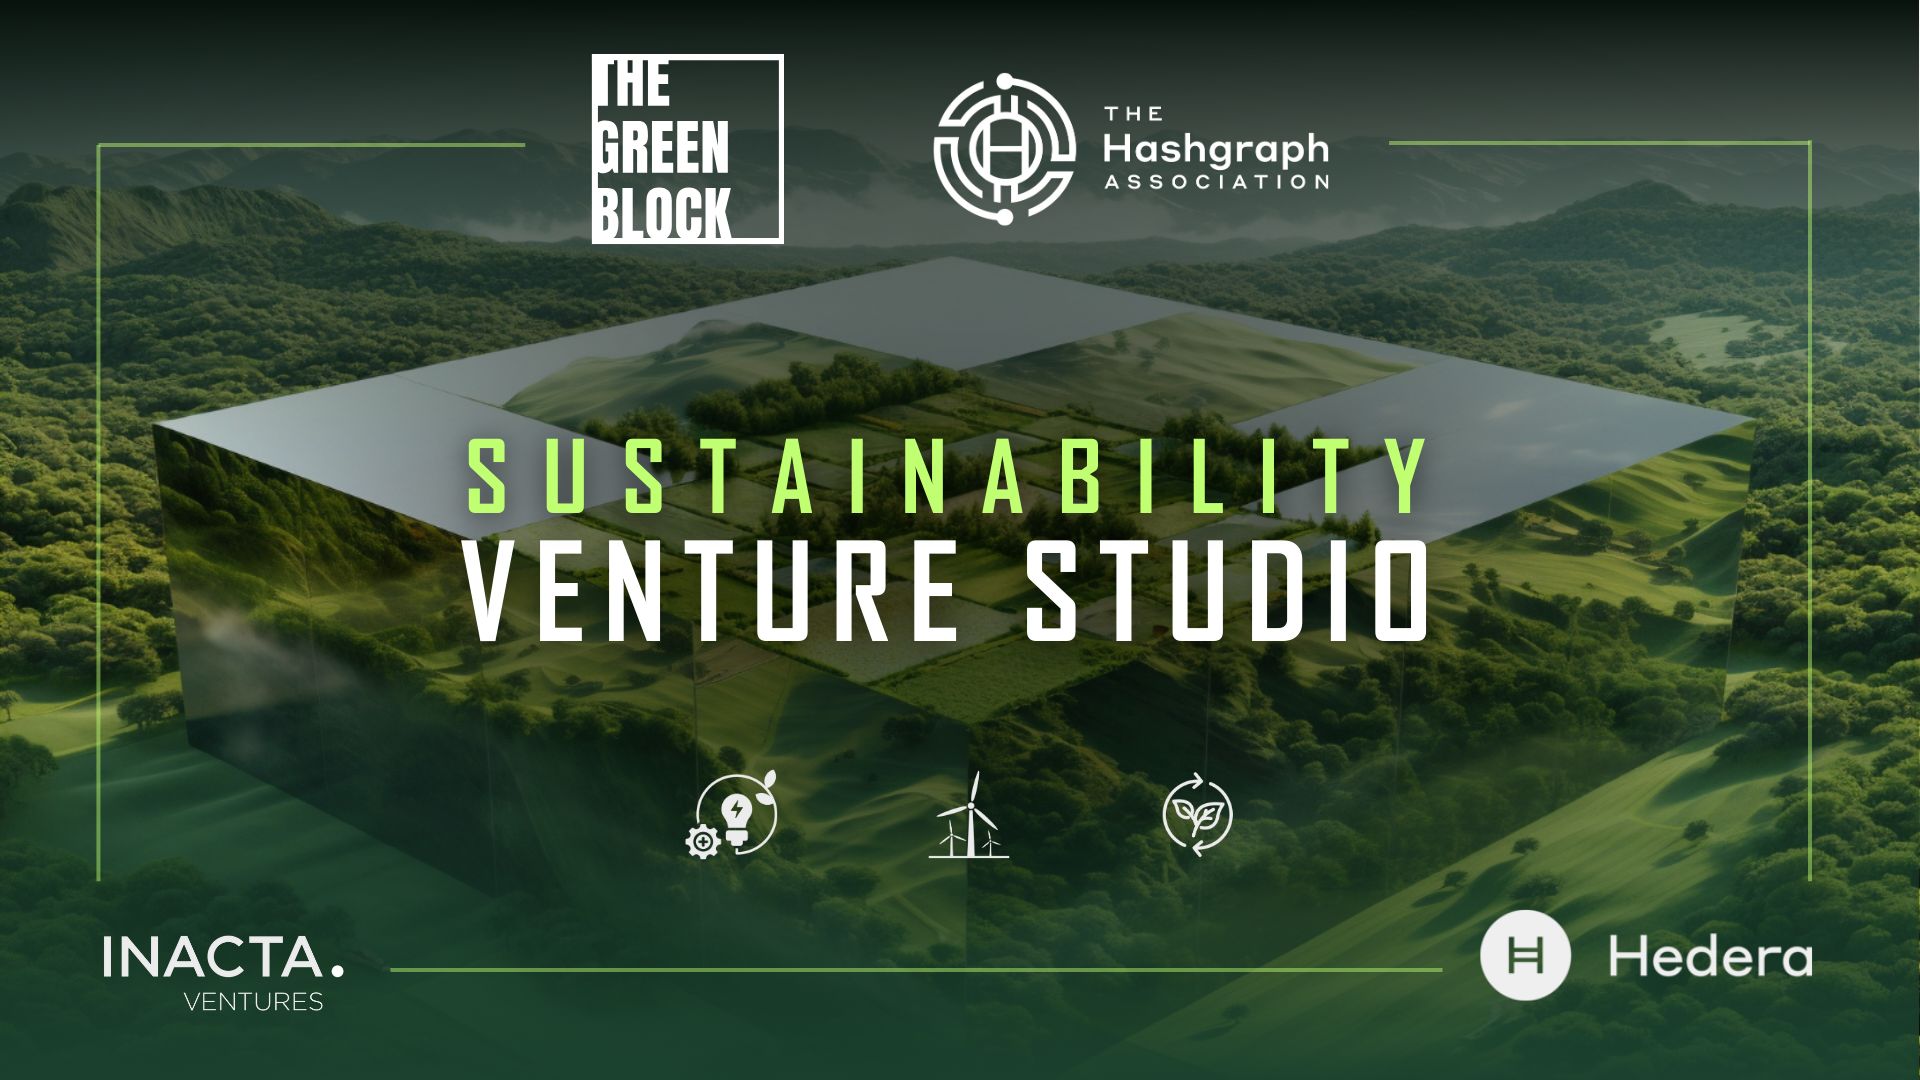 The Hashgraph Association and Inacta Ventures launch $50 million Sustainability Venture Studio under The Green Block Initiative